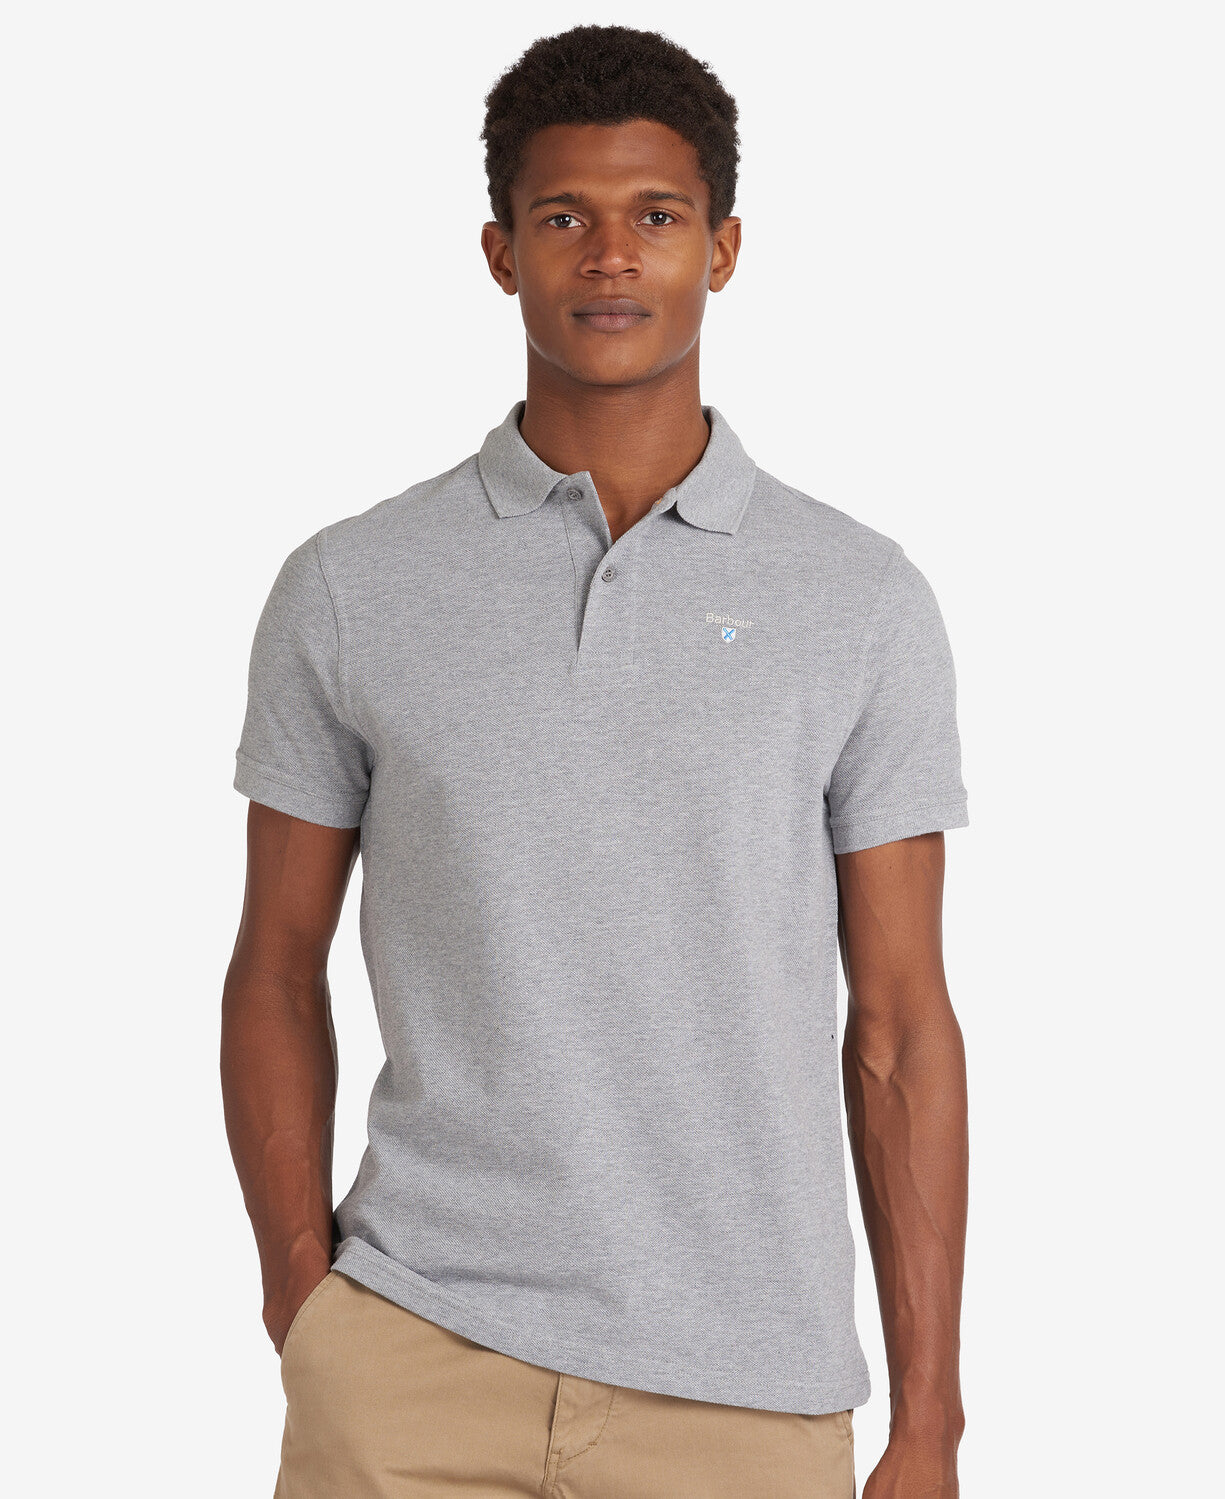 Barbour Sports Polo - Grey Marl